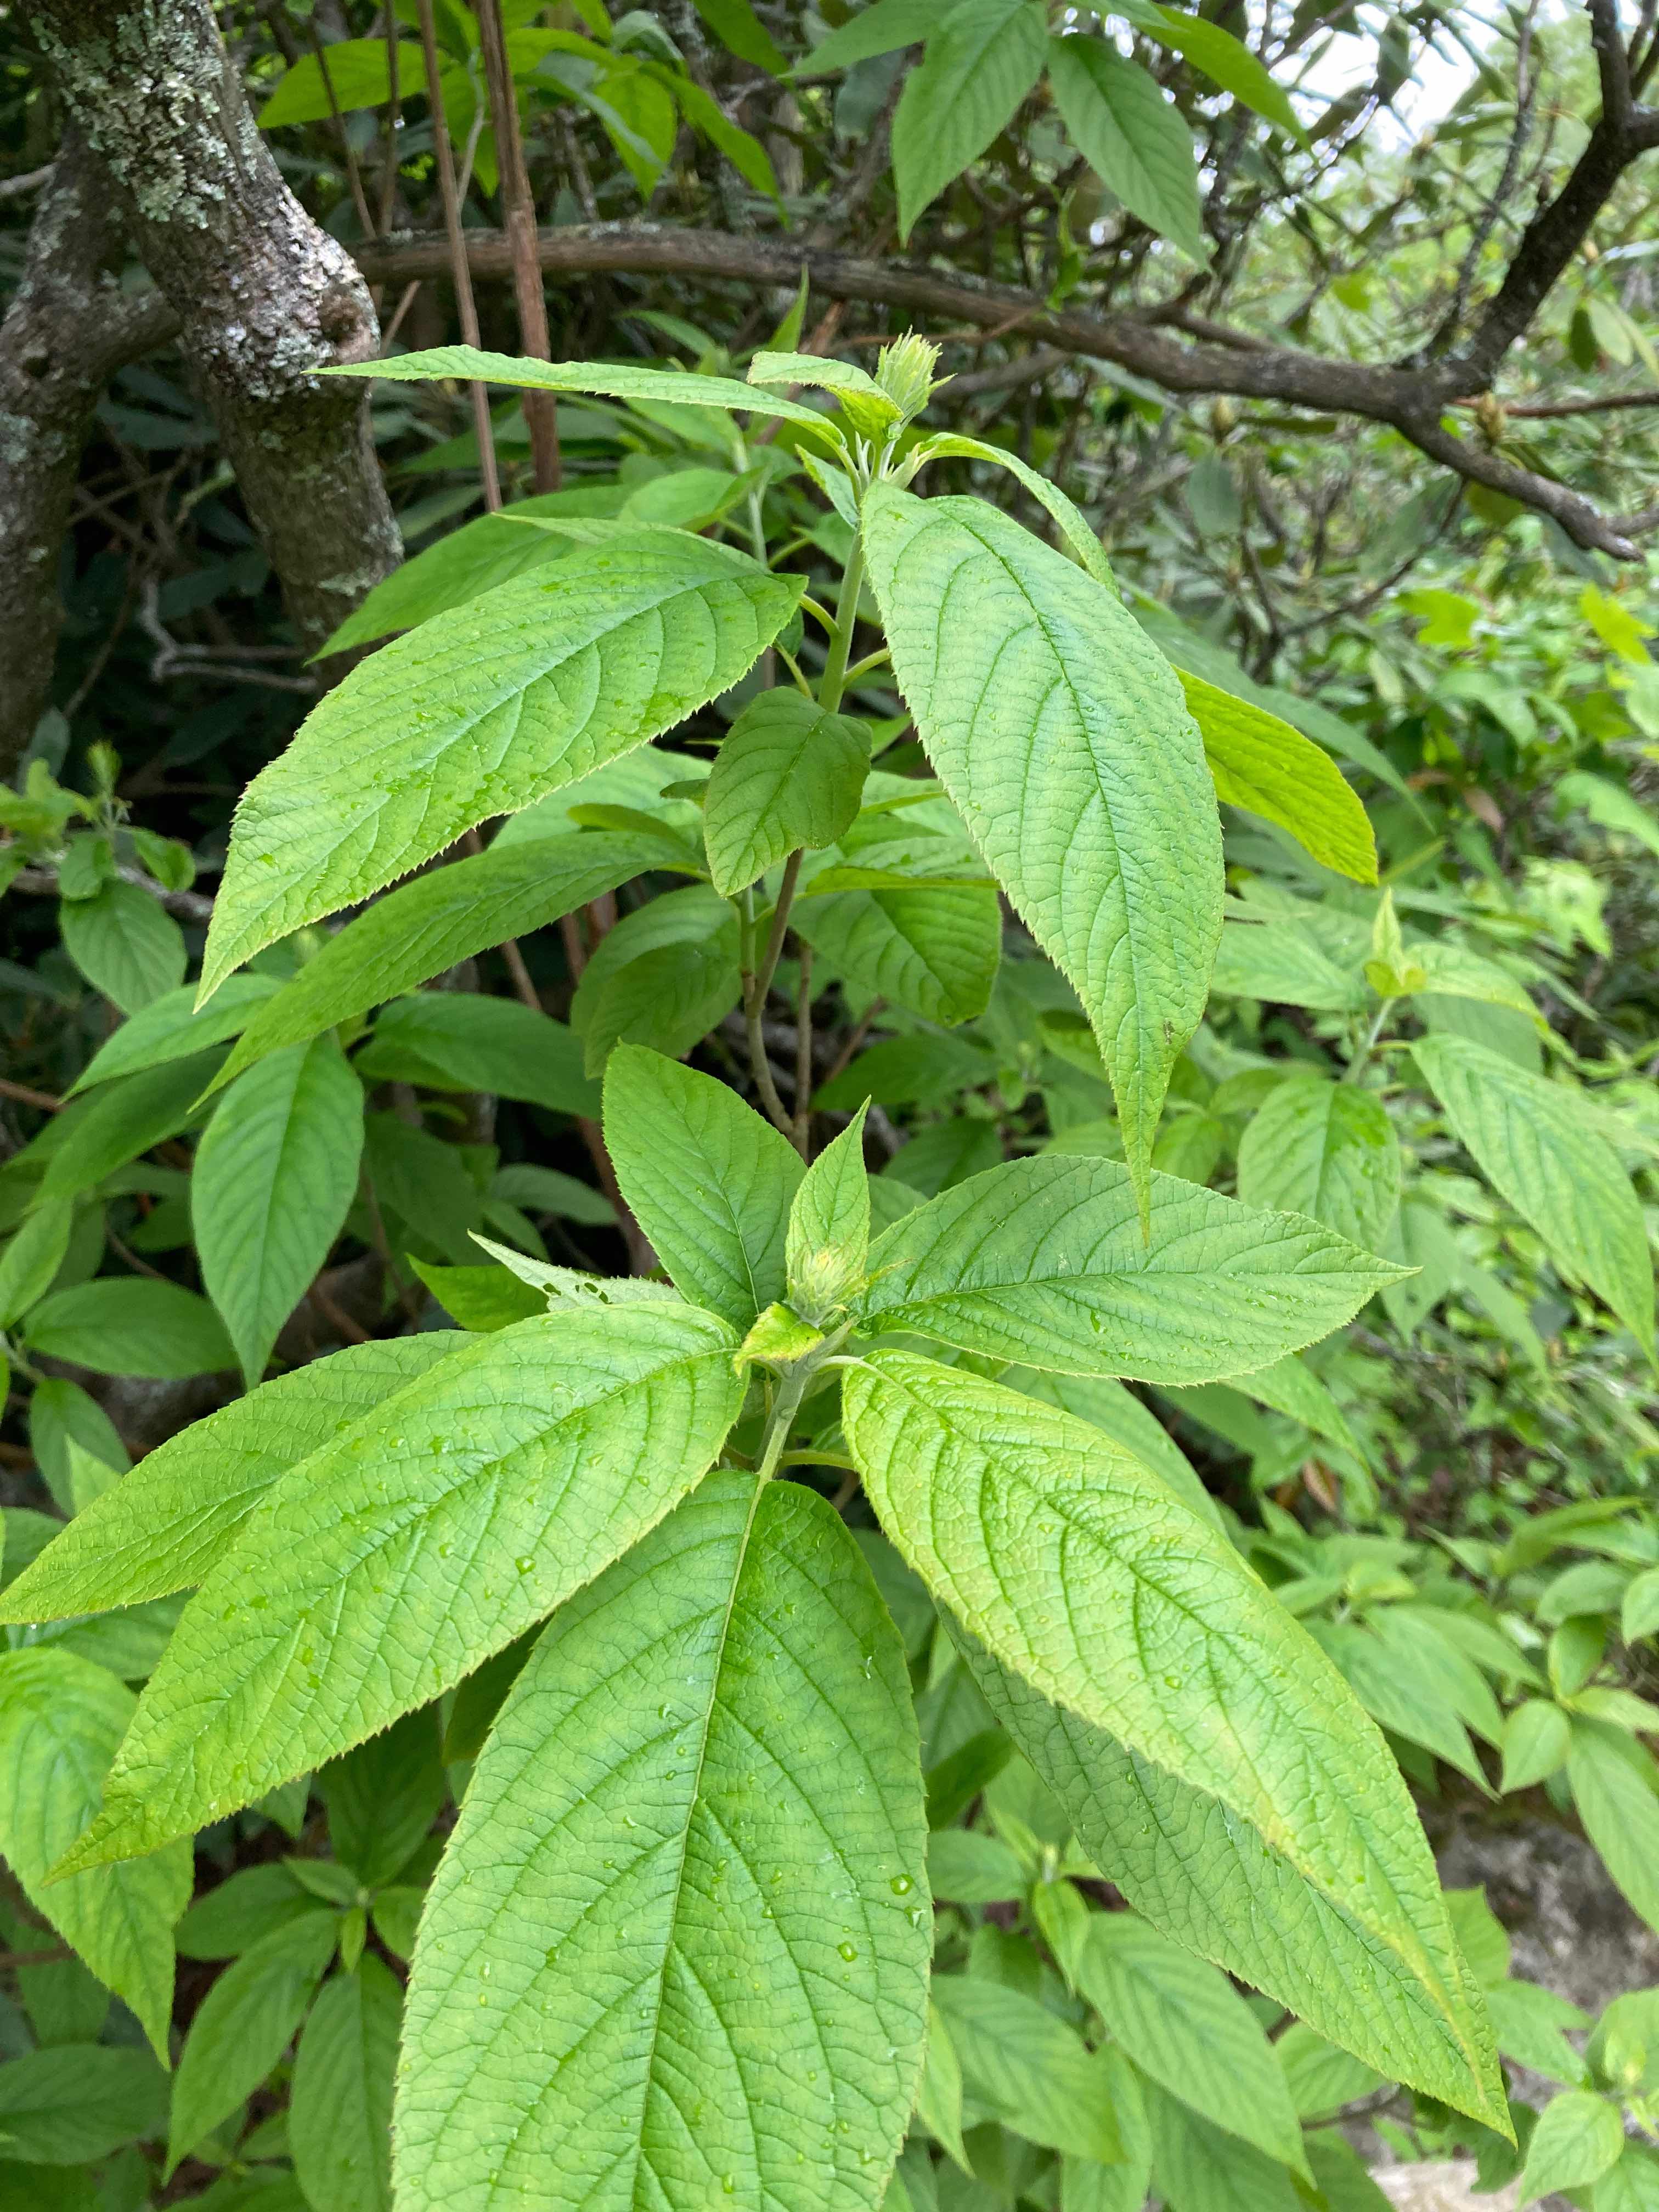 The Scientific Name is Clethra acuminata. You will likely hear them called Mountain Sweet-pepperbush, Mountain White-alder. This picture shows the The strongly veined, large, alternate leaves have serrated/toothed margins and a long acuminate tip.  of Clethra acuminata